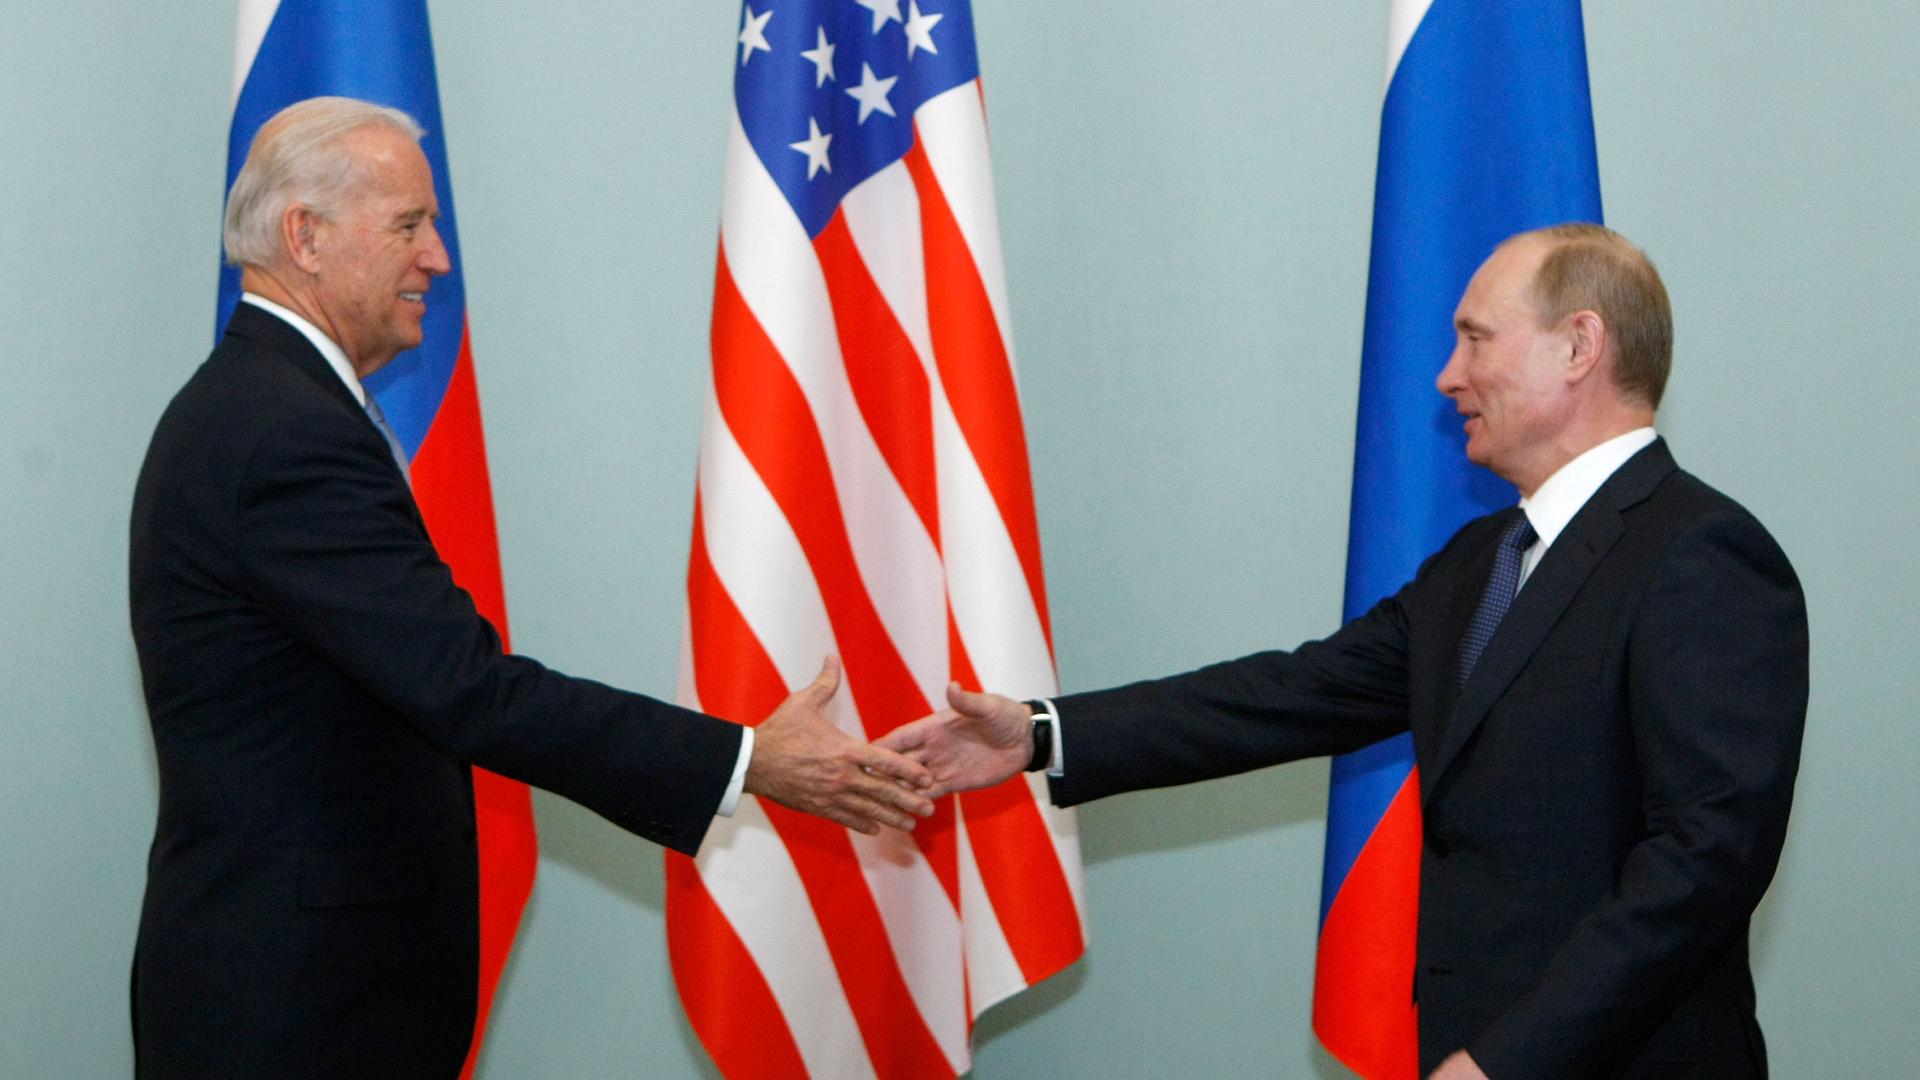 Joe Biden is shown with his hand outstretched shaking the hand of Vladimir Putin.